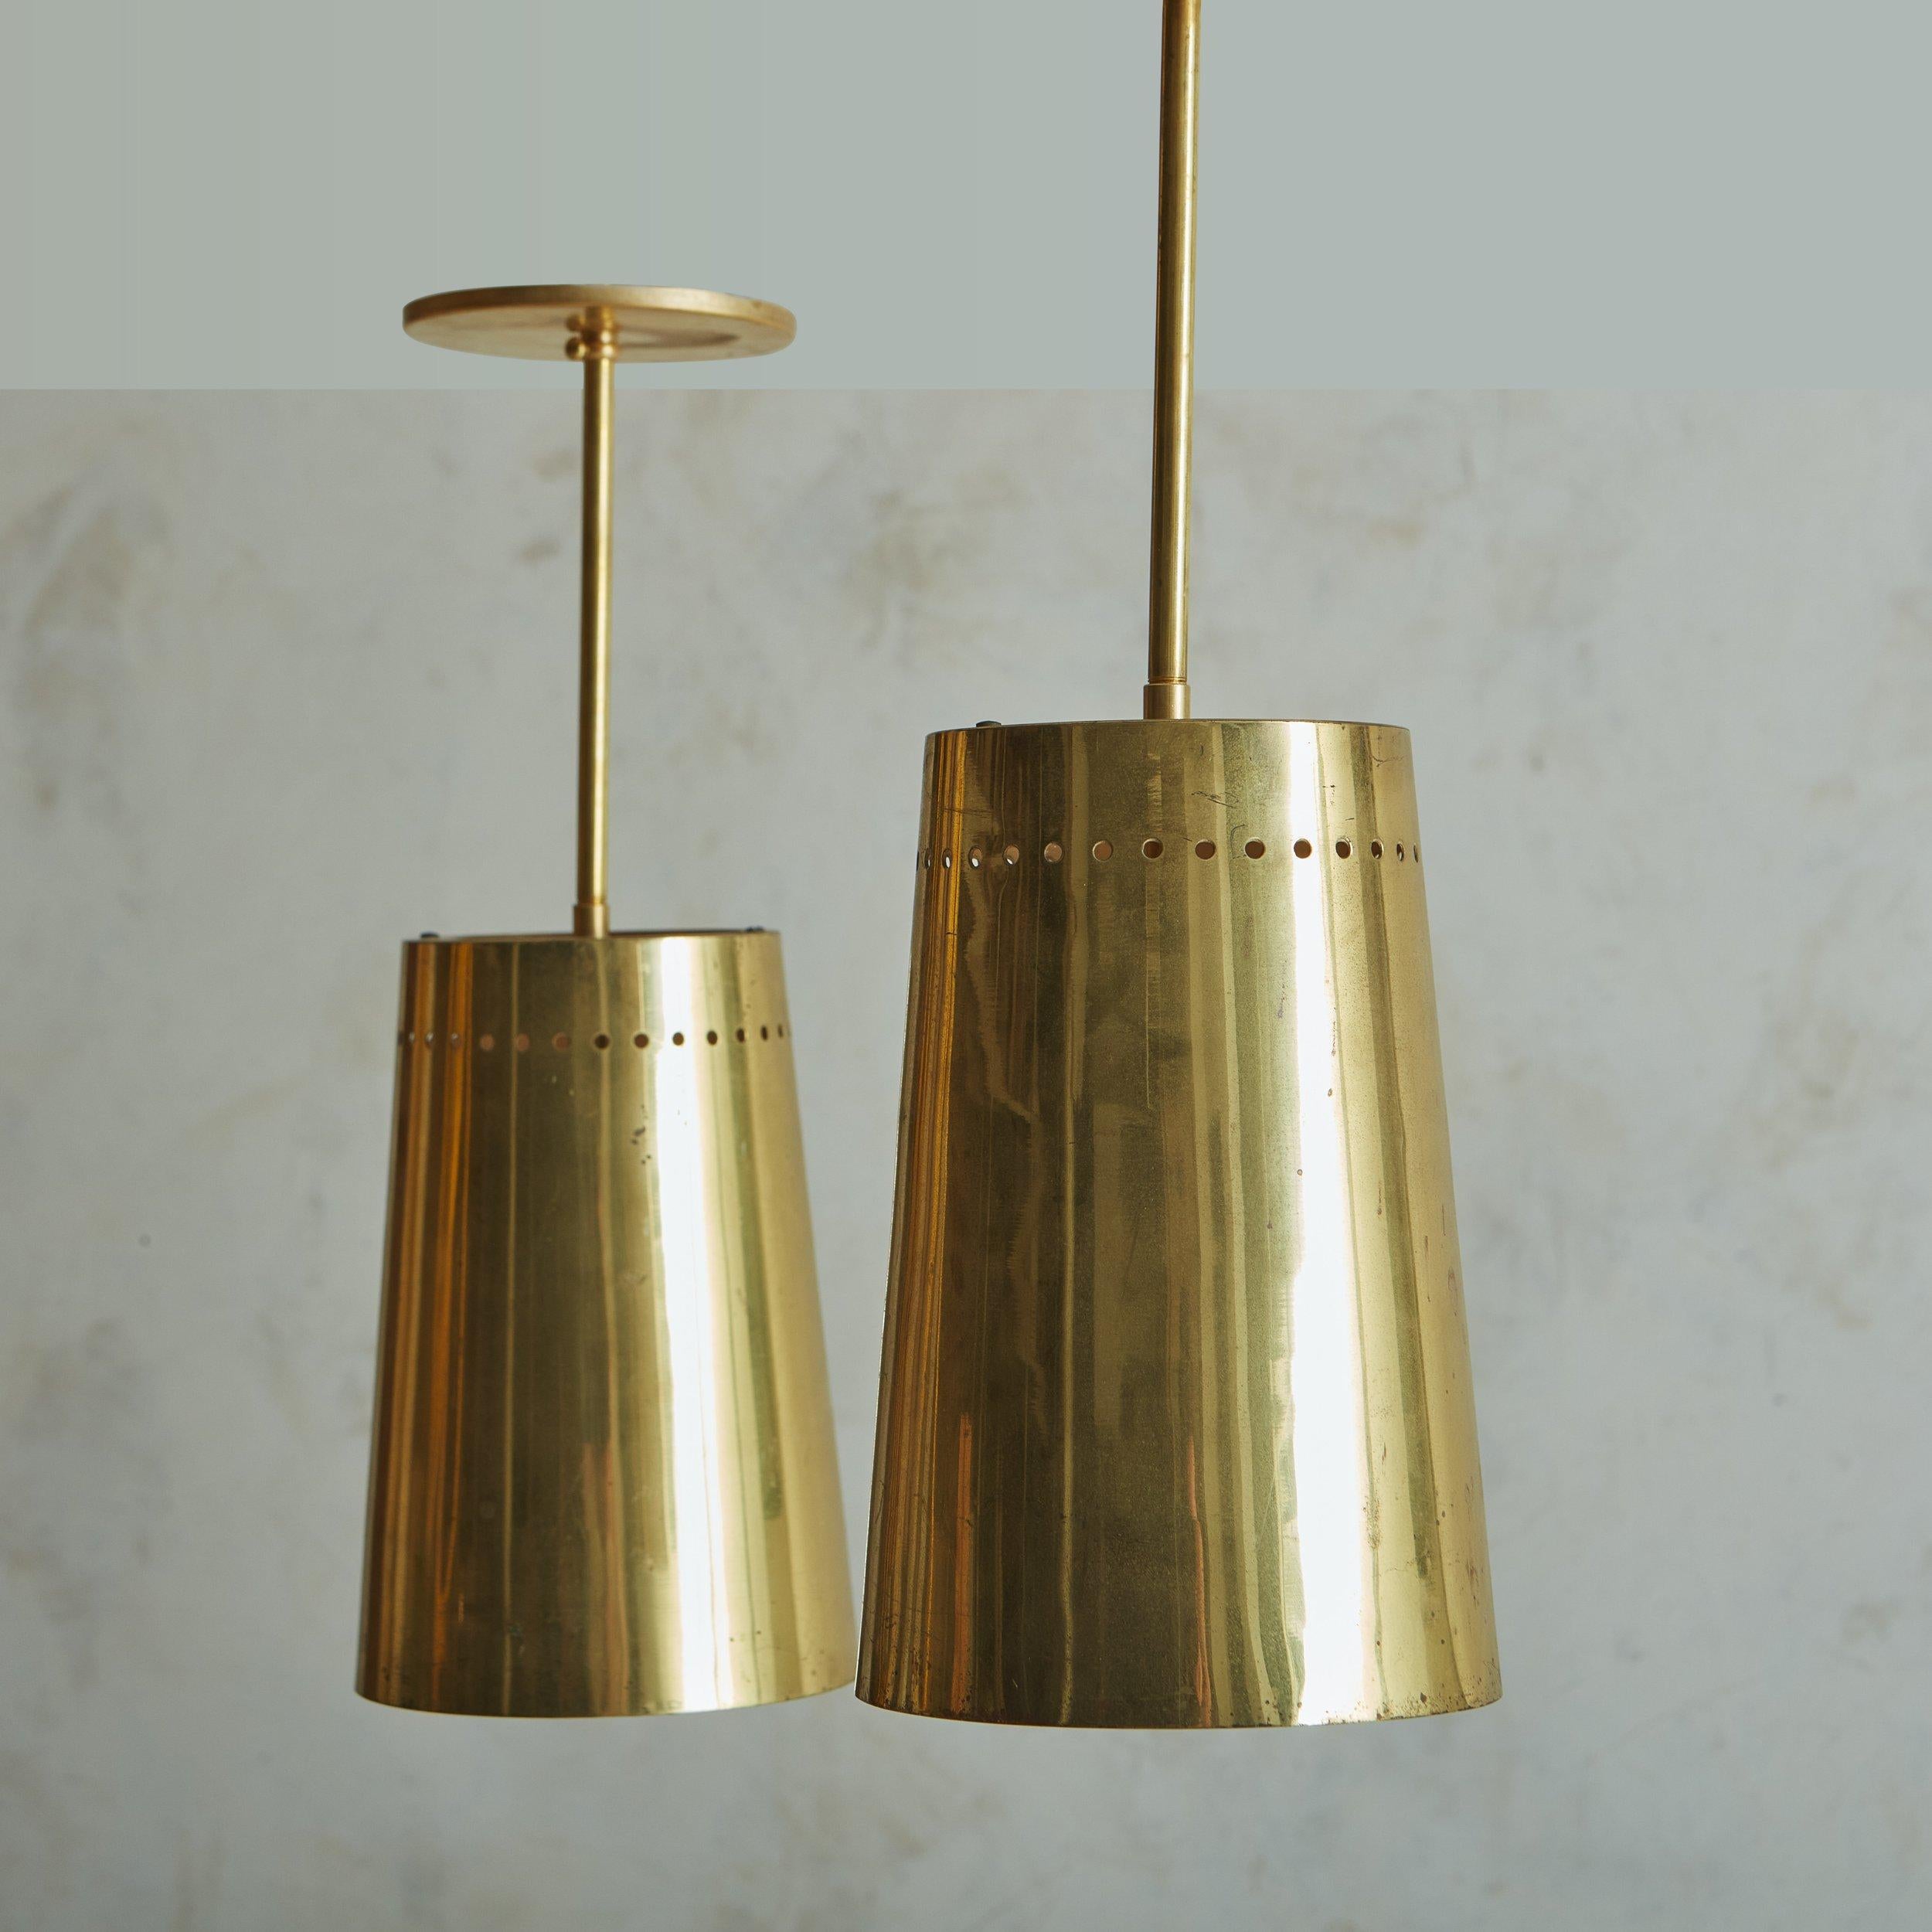 Modern Vintage Brass Pendant Light with Perforated Trim - 2 Available For Sale